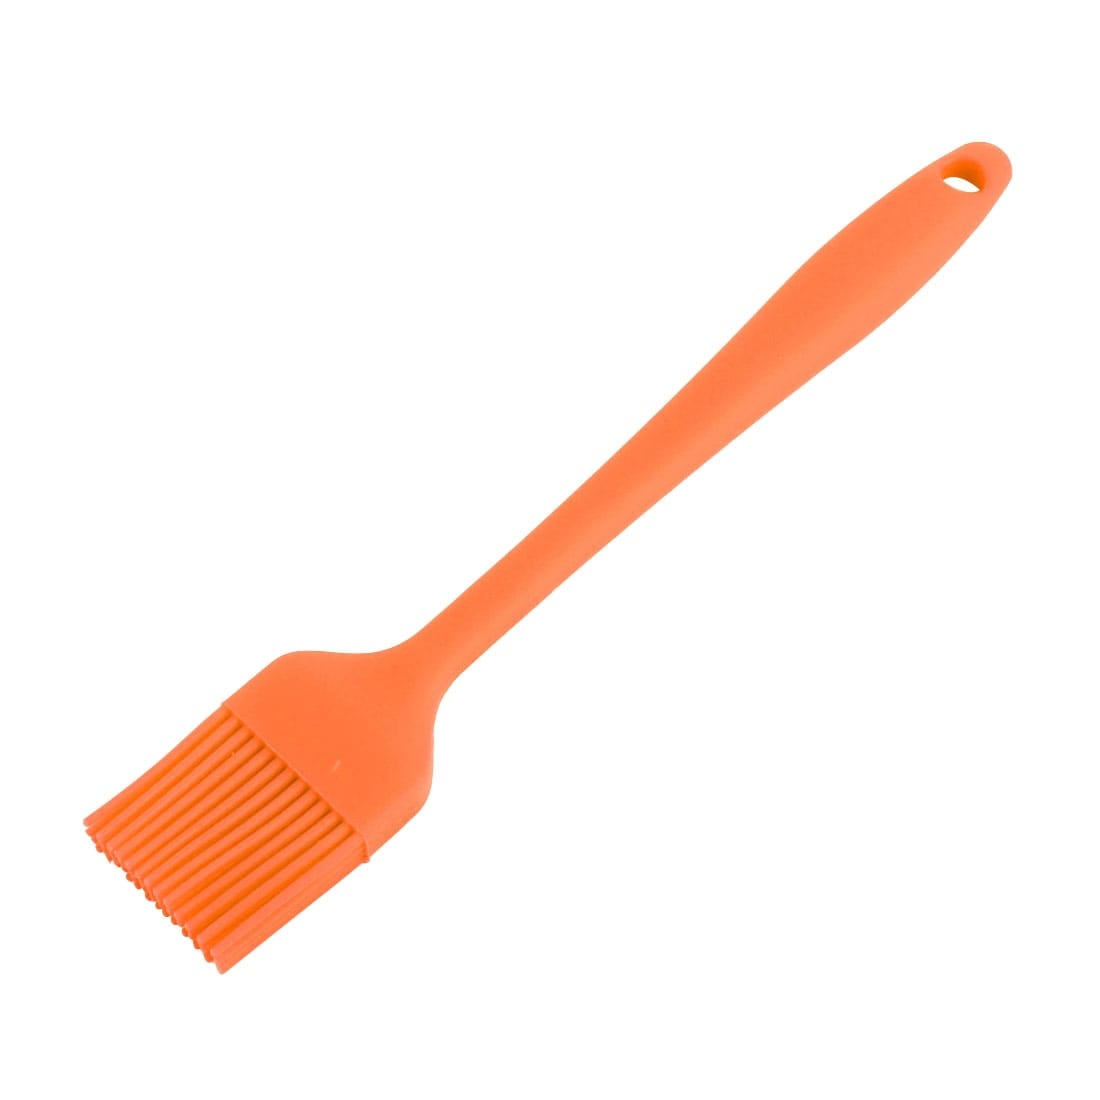 Kitchenware Silicone Cooking Tool Baster Turkey Barbecue Pastry Brush  Orange - Bed Bath & Beyond - 17638084